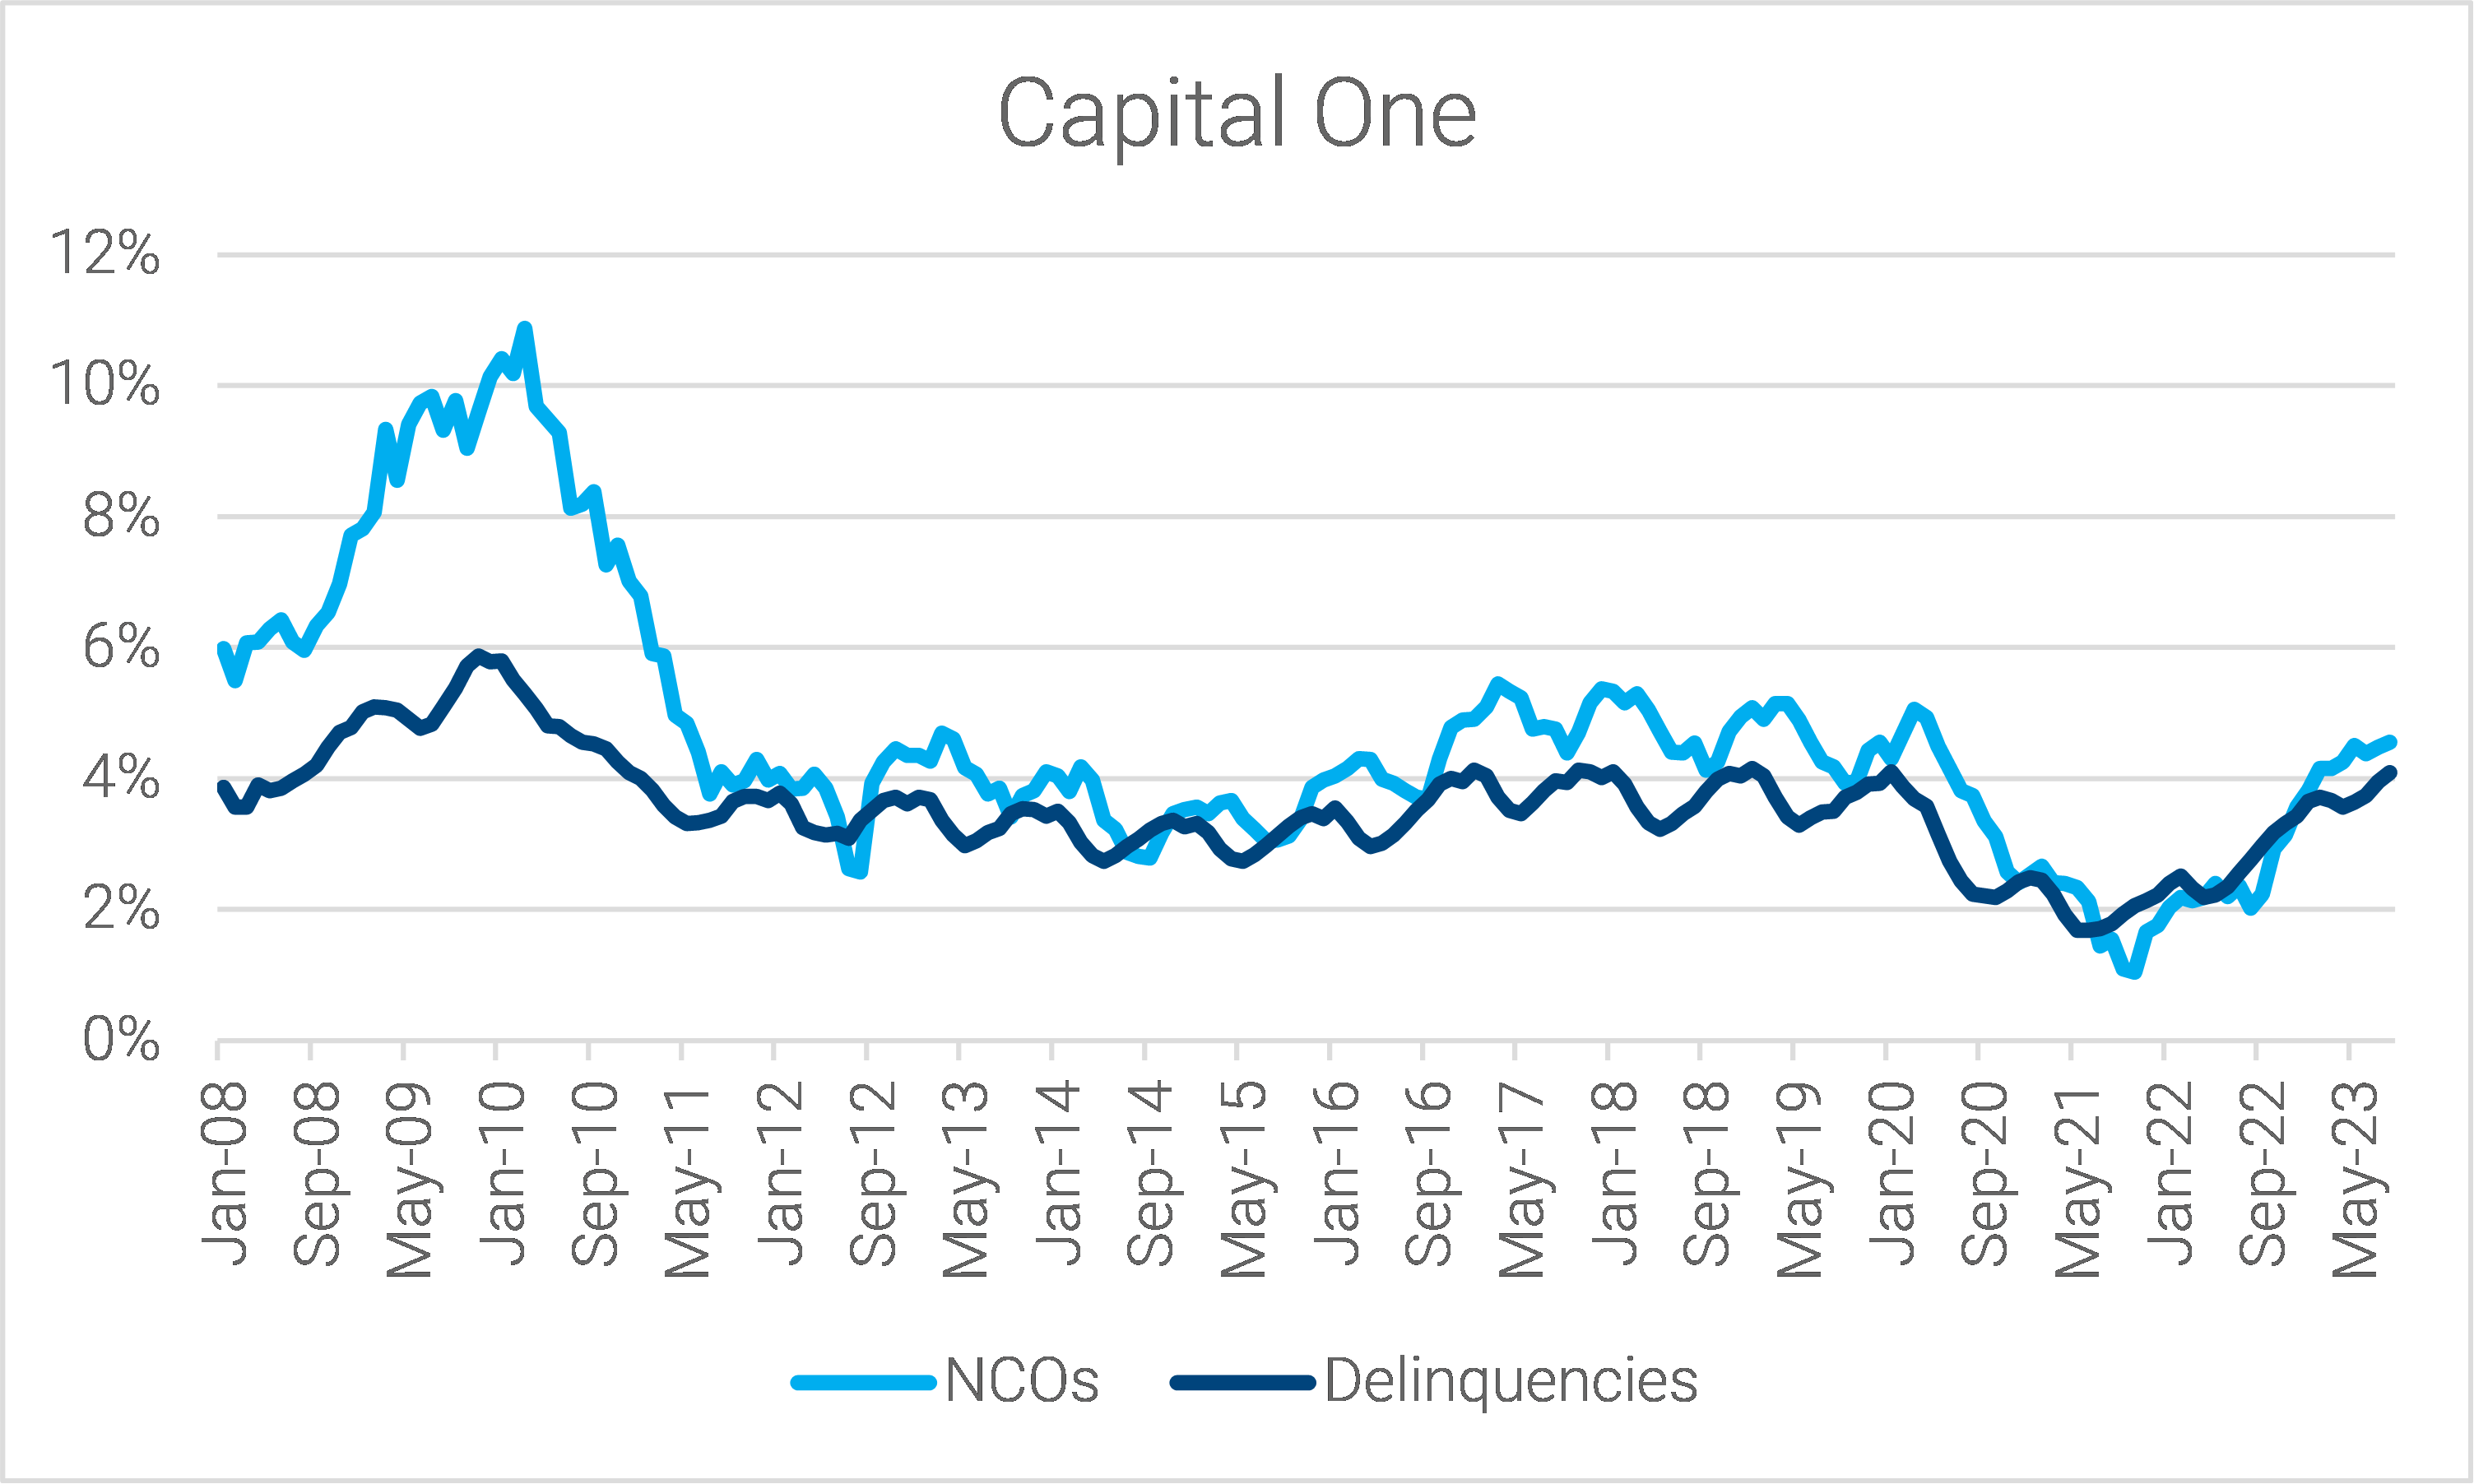 09-capital-one-master-trust-net-charge-off-and-delinquency-rates